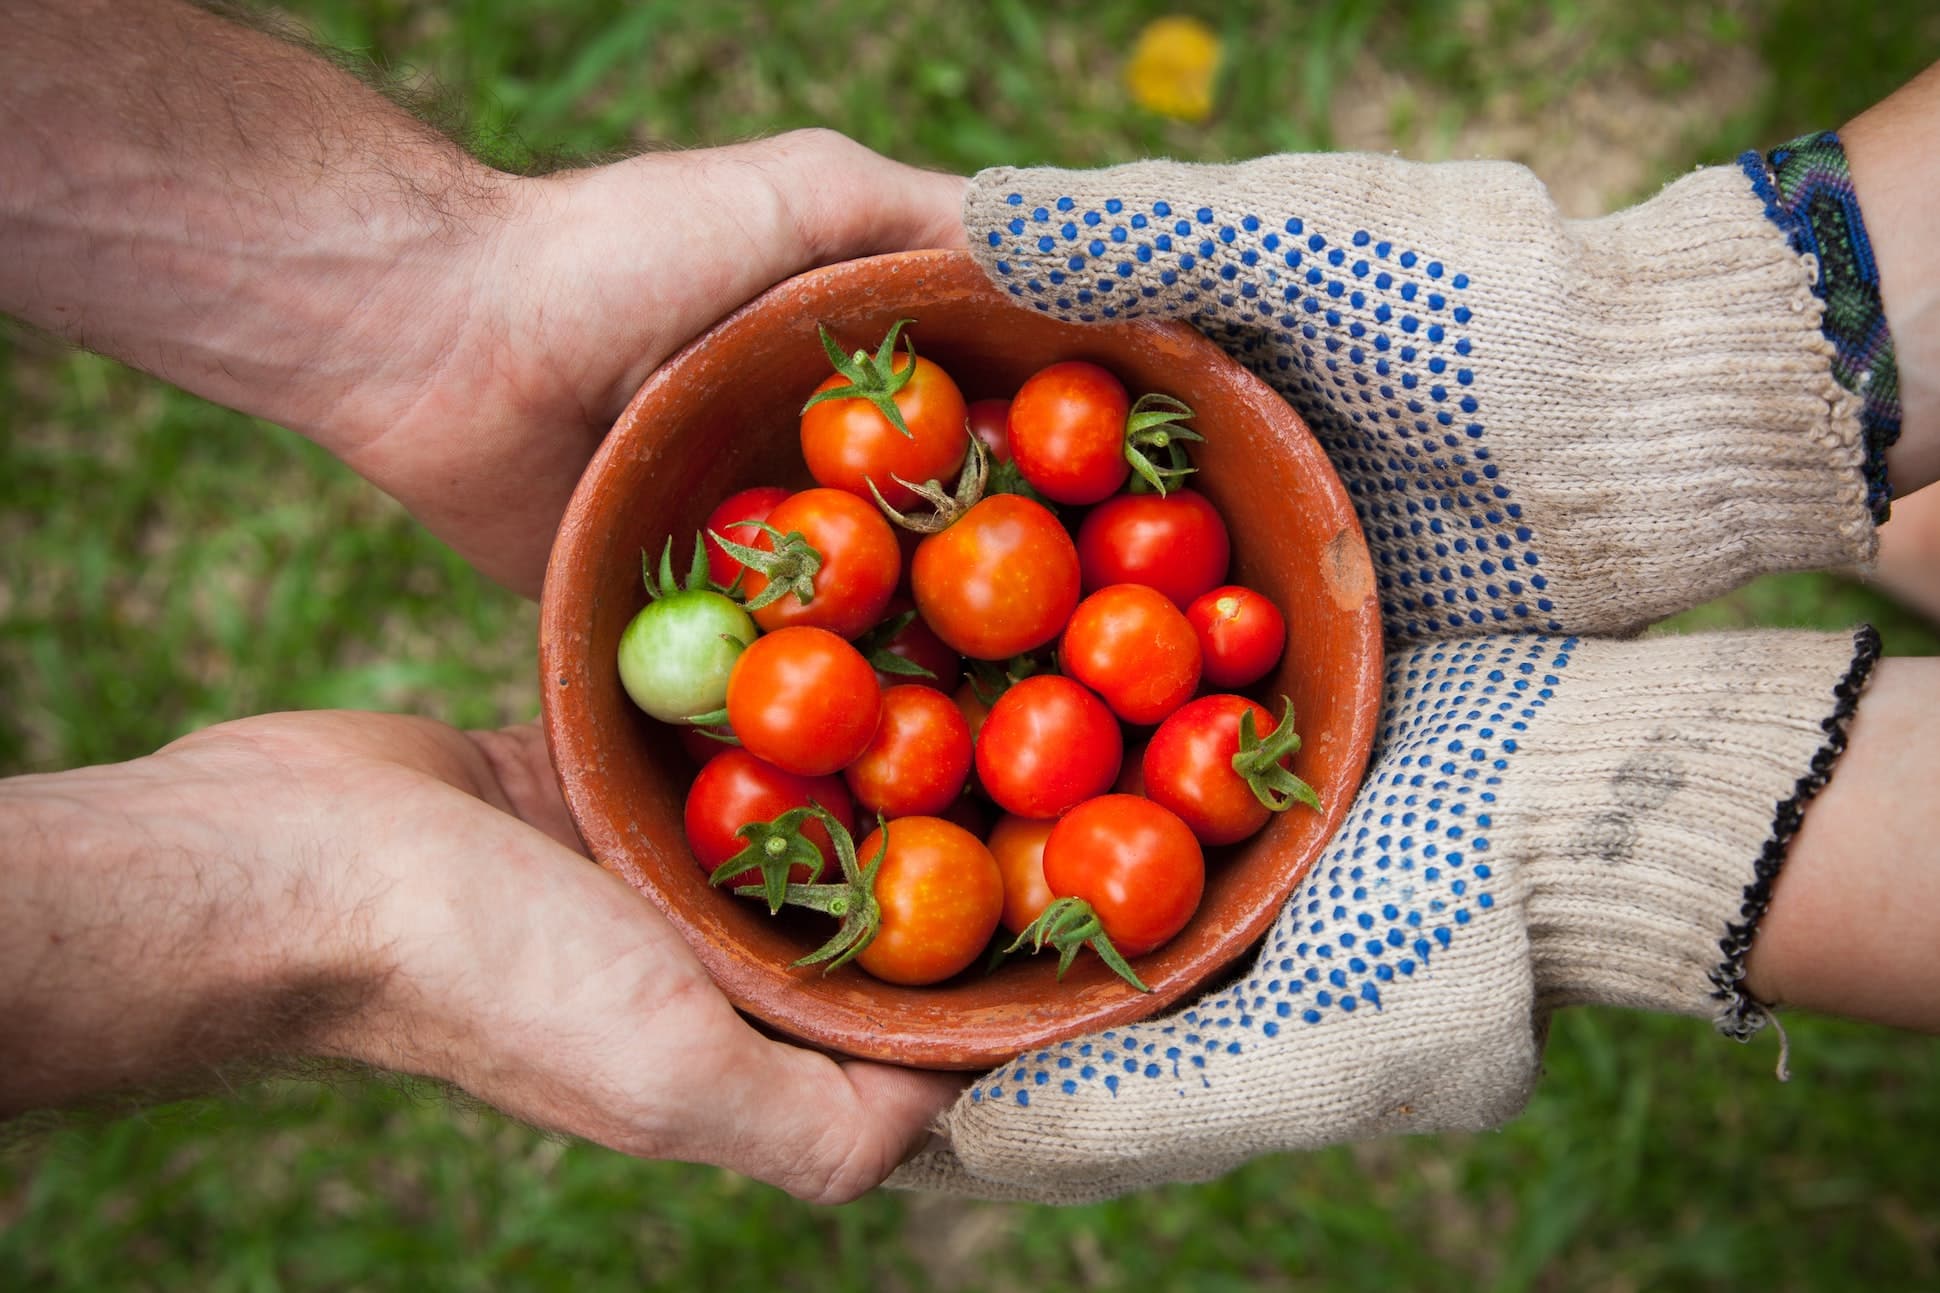 Photo of farmers holding tomatoes by Elaine Casap for Unsplash